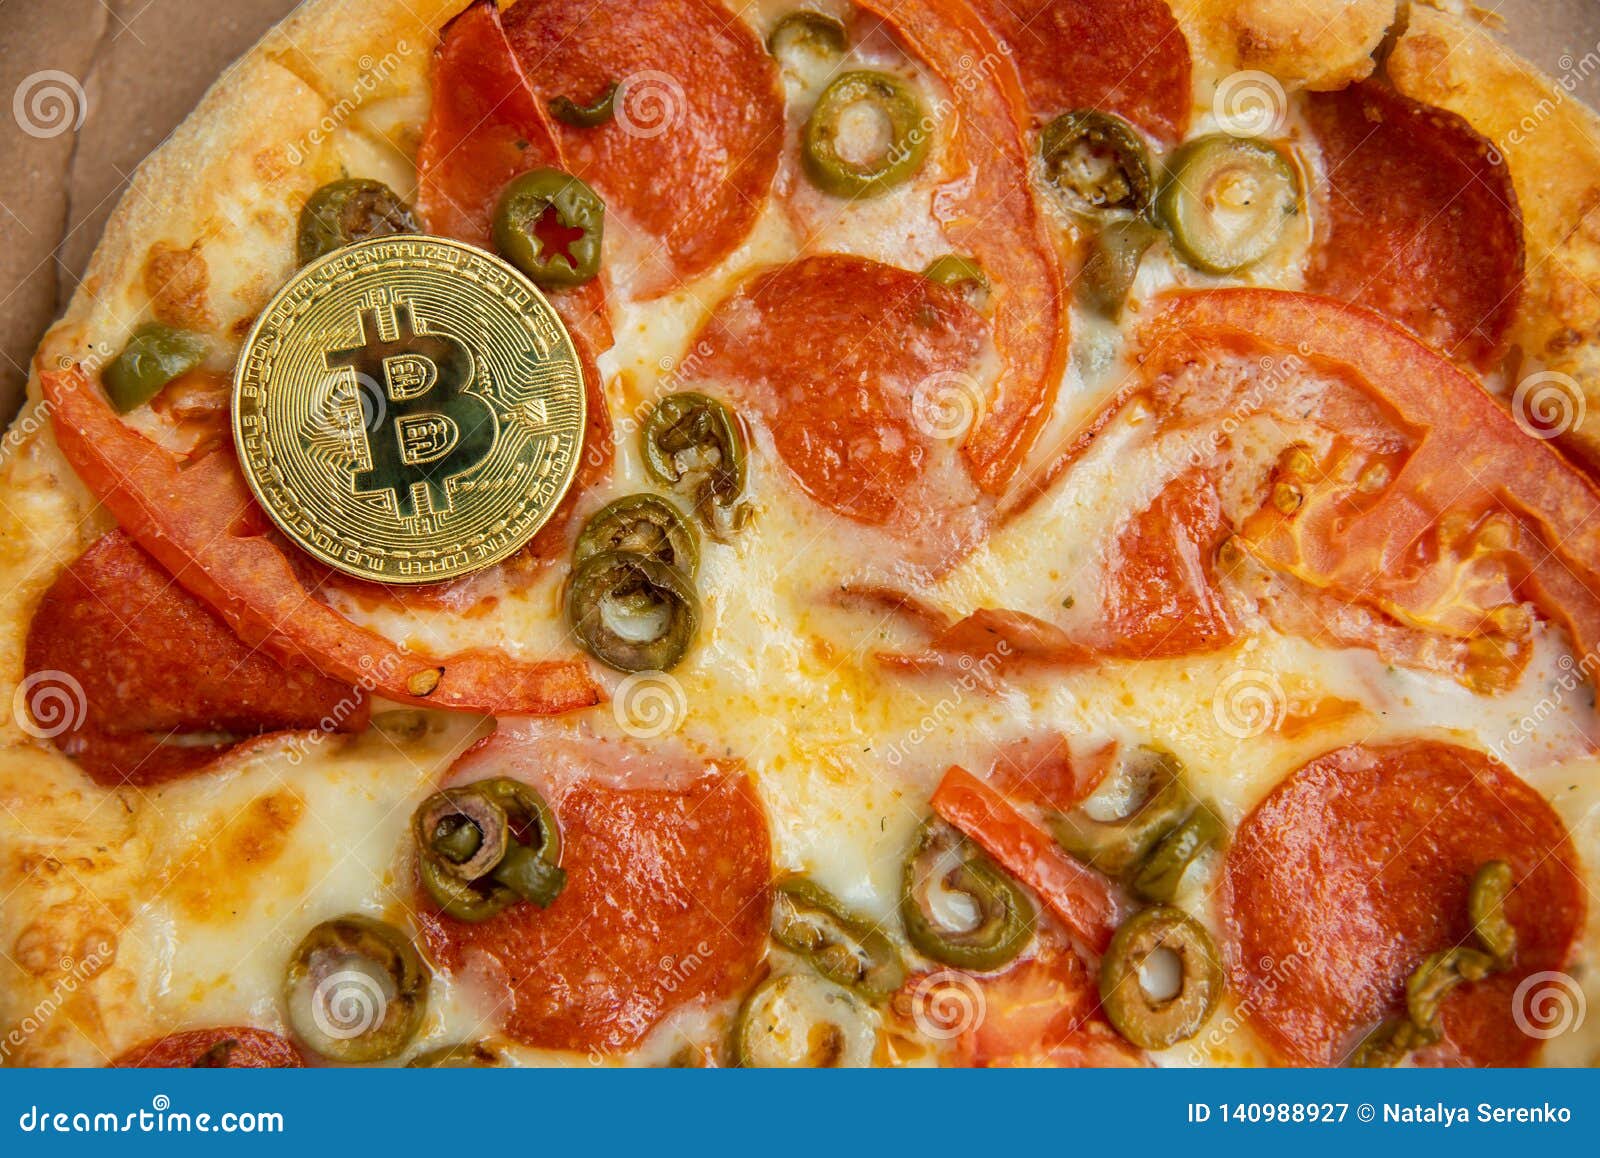 Bitcoin Pizza Day 22 May. Cryptocommunity Holiday. Concept Of Buying Pizza With Bitcoin Stock ...